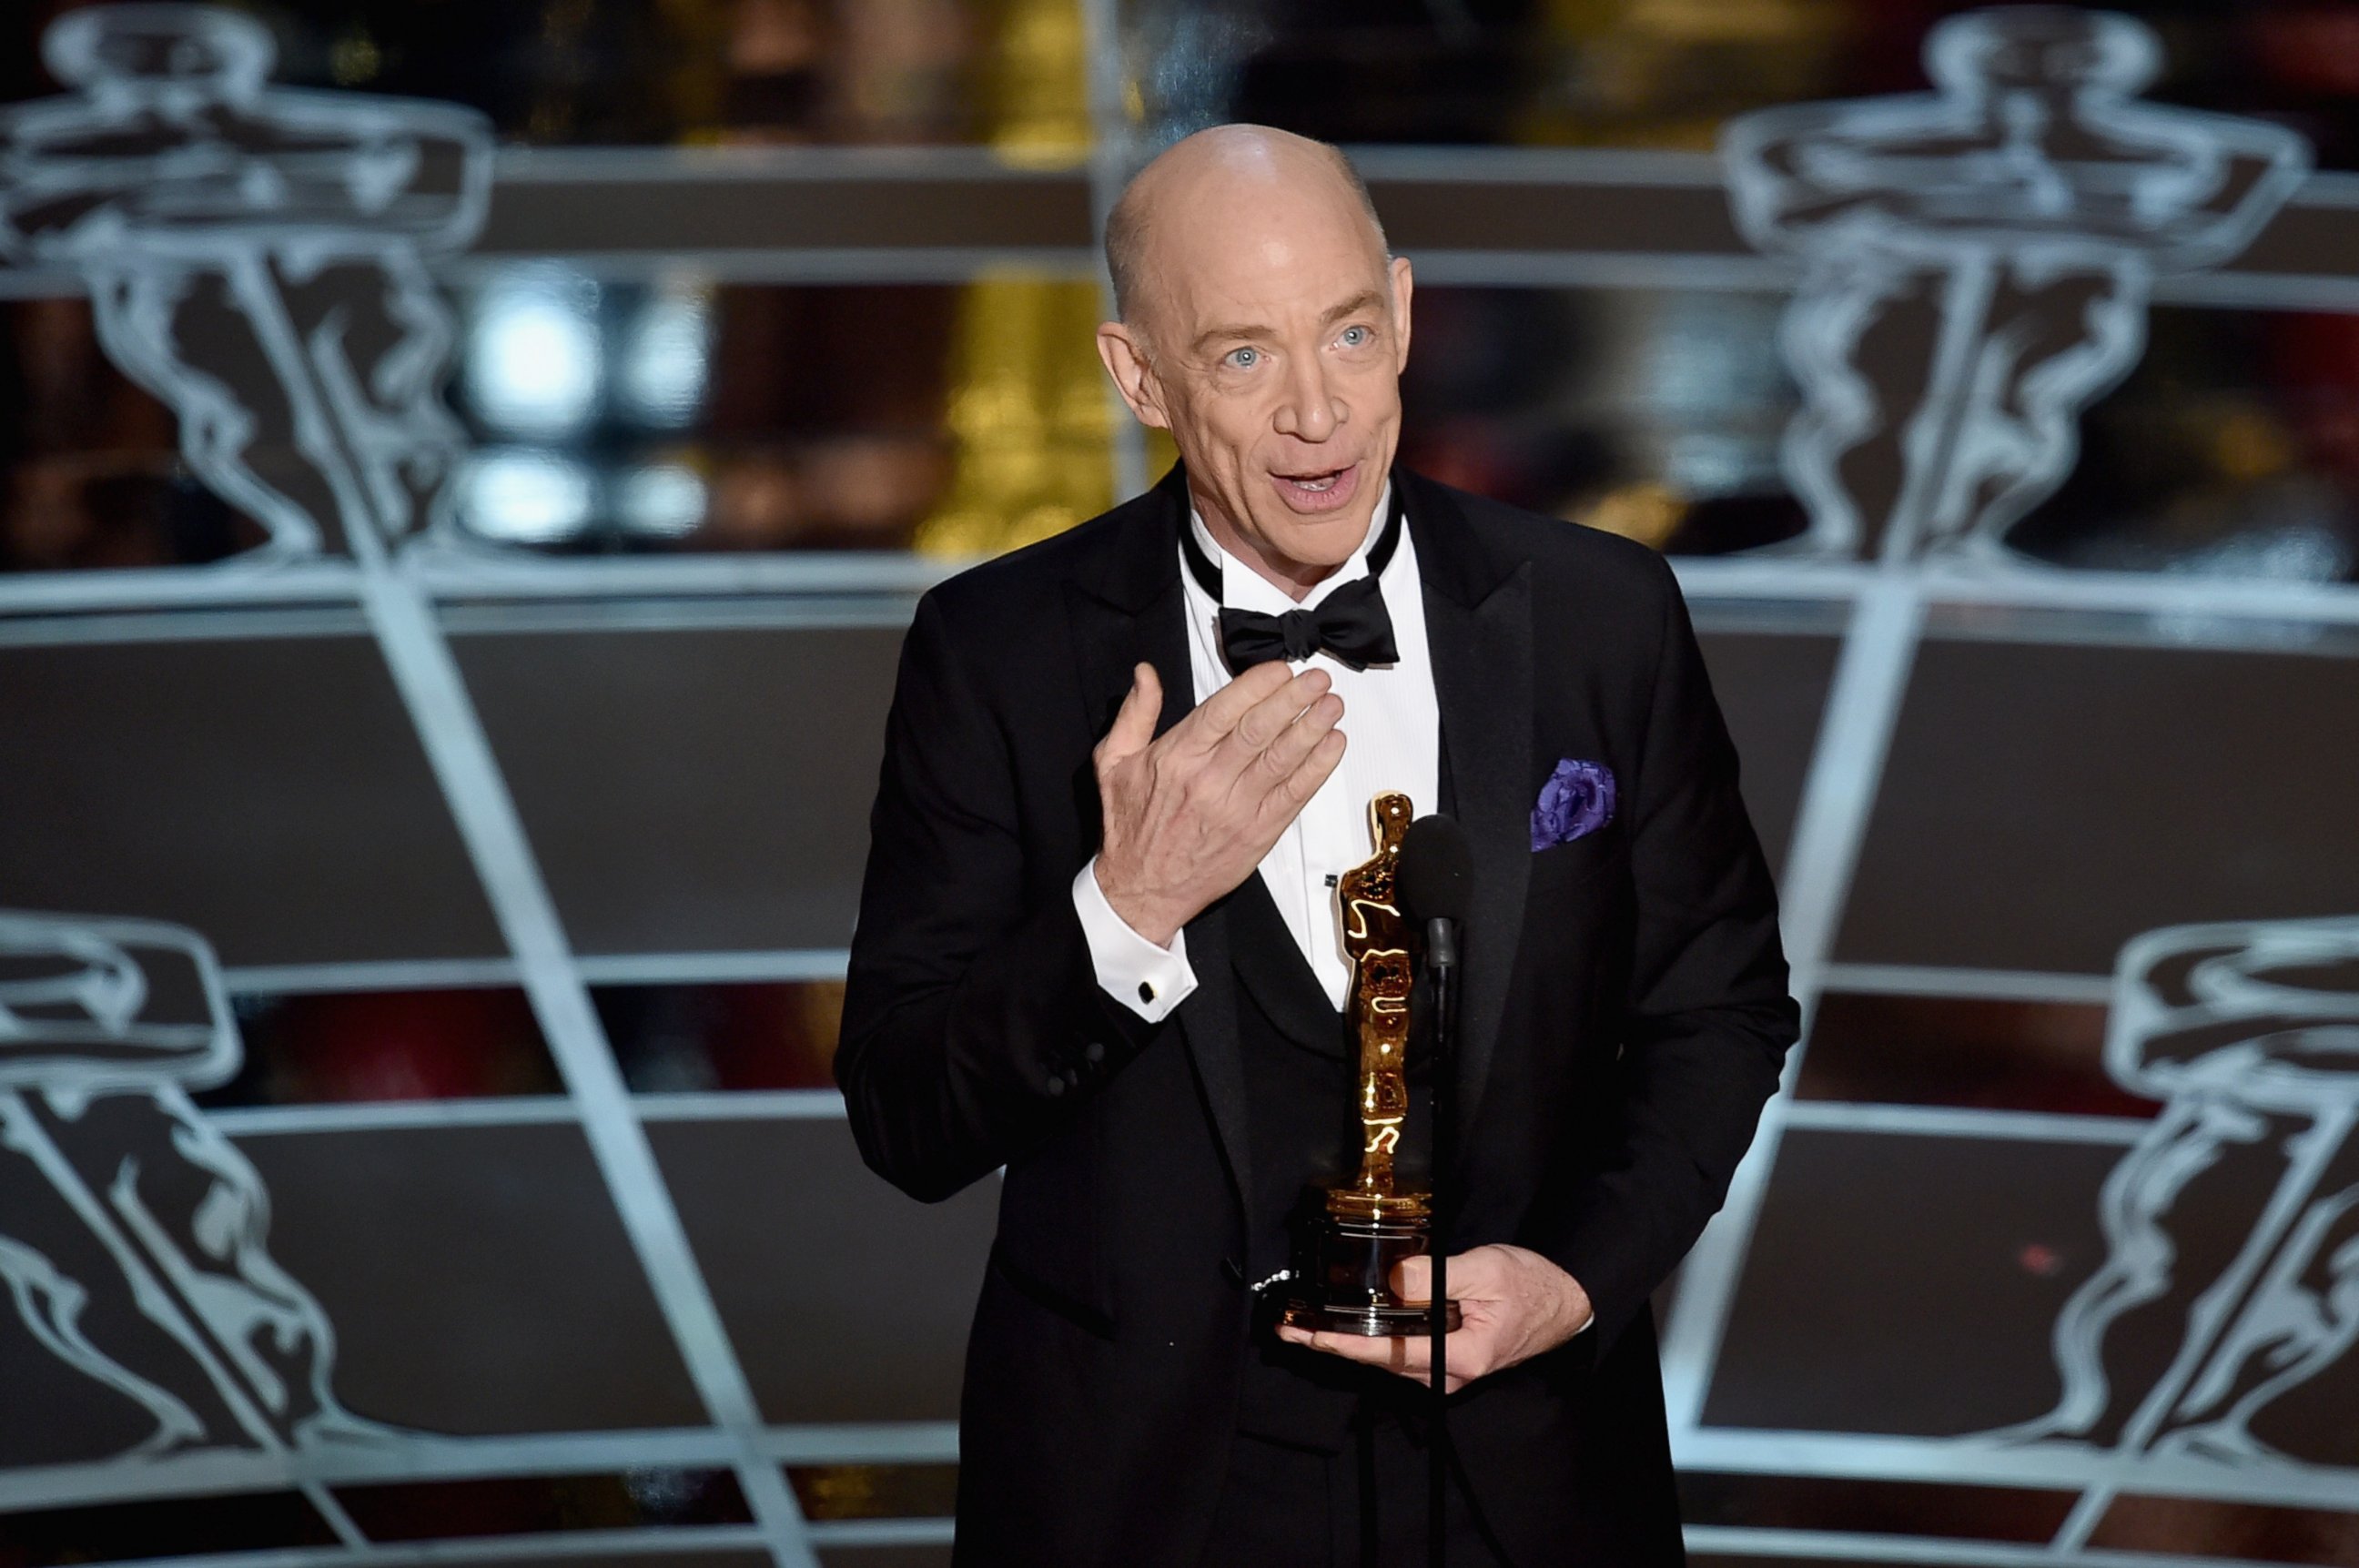 PHOTO: J.K. Simmons accepts the Actor in a Supporting Role Award for "Whiplash" onstage during the 87th Annual Academy Awards at Dolby Theatre on Feb. 22, 2015 in Hollywood, Calif.